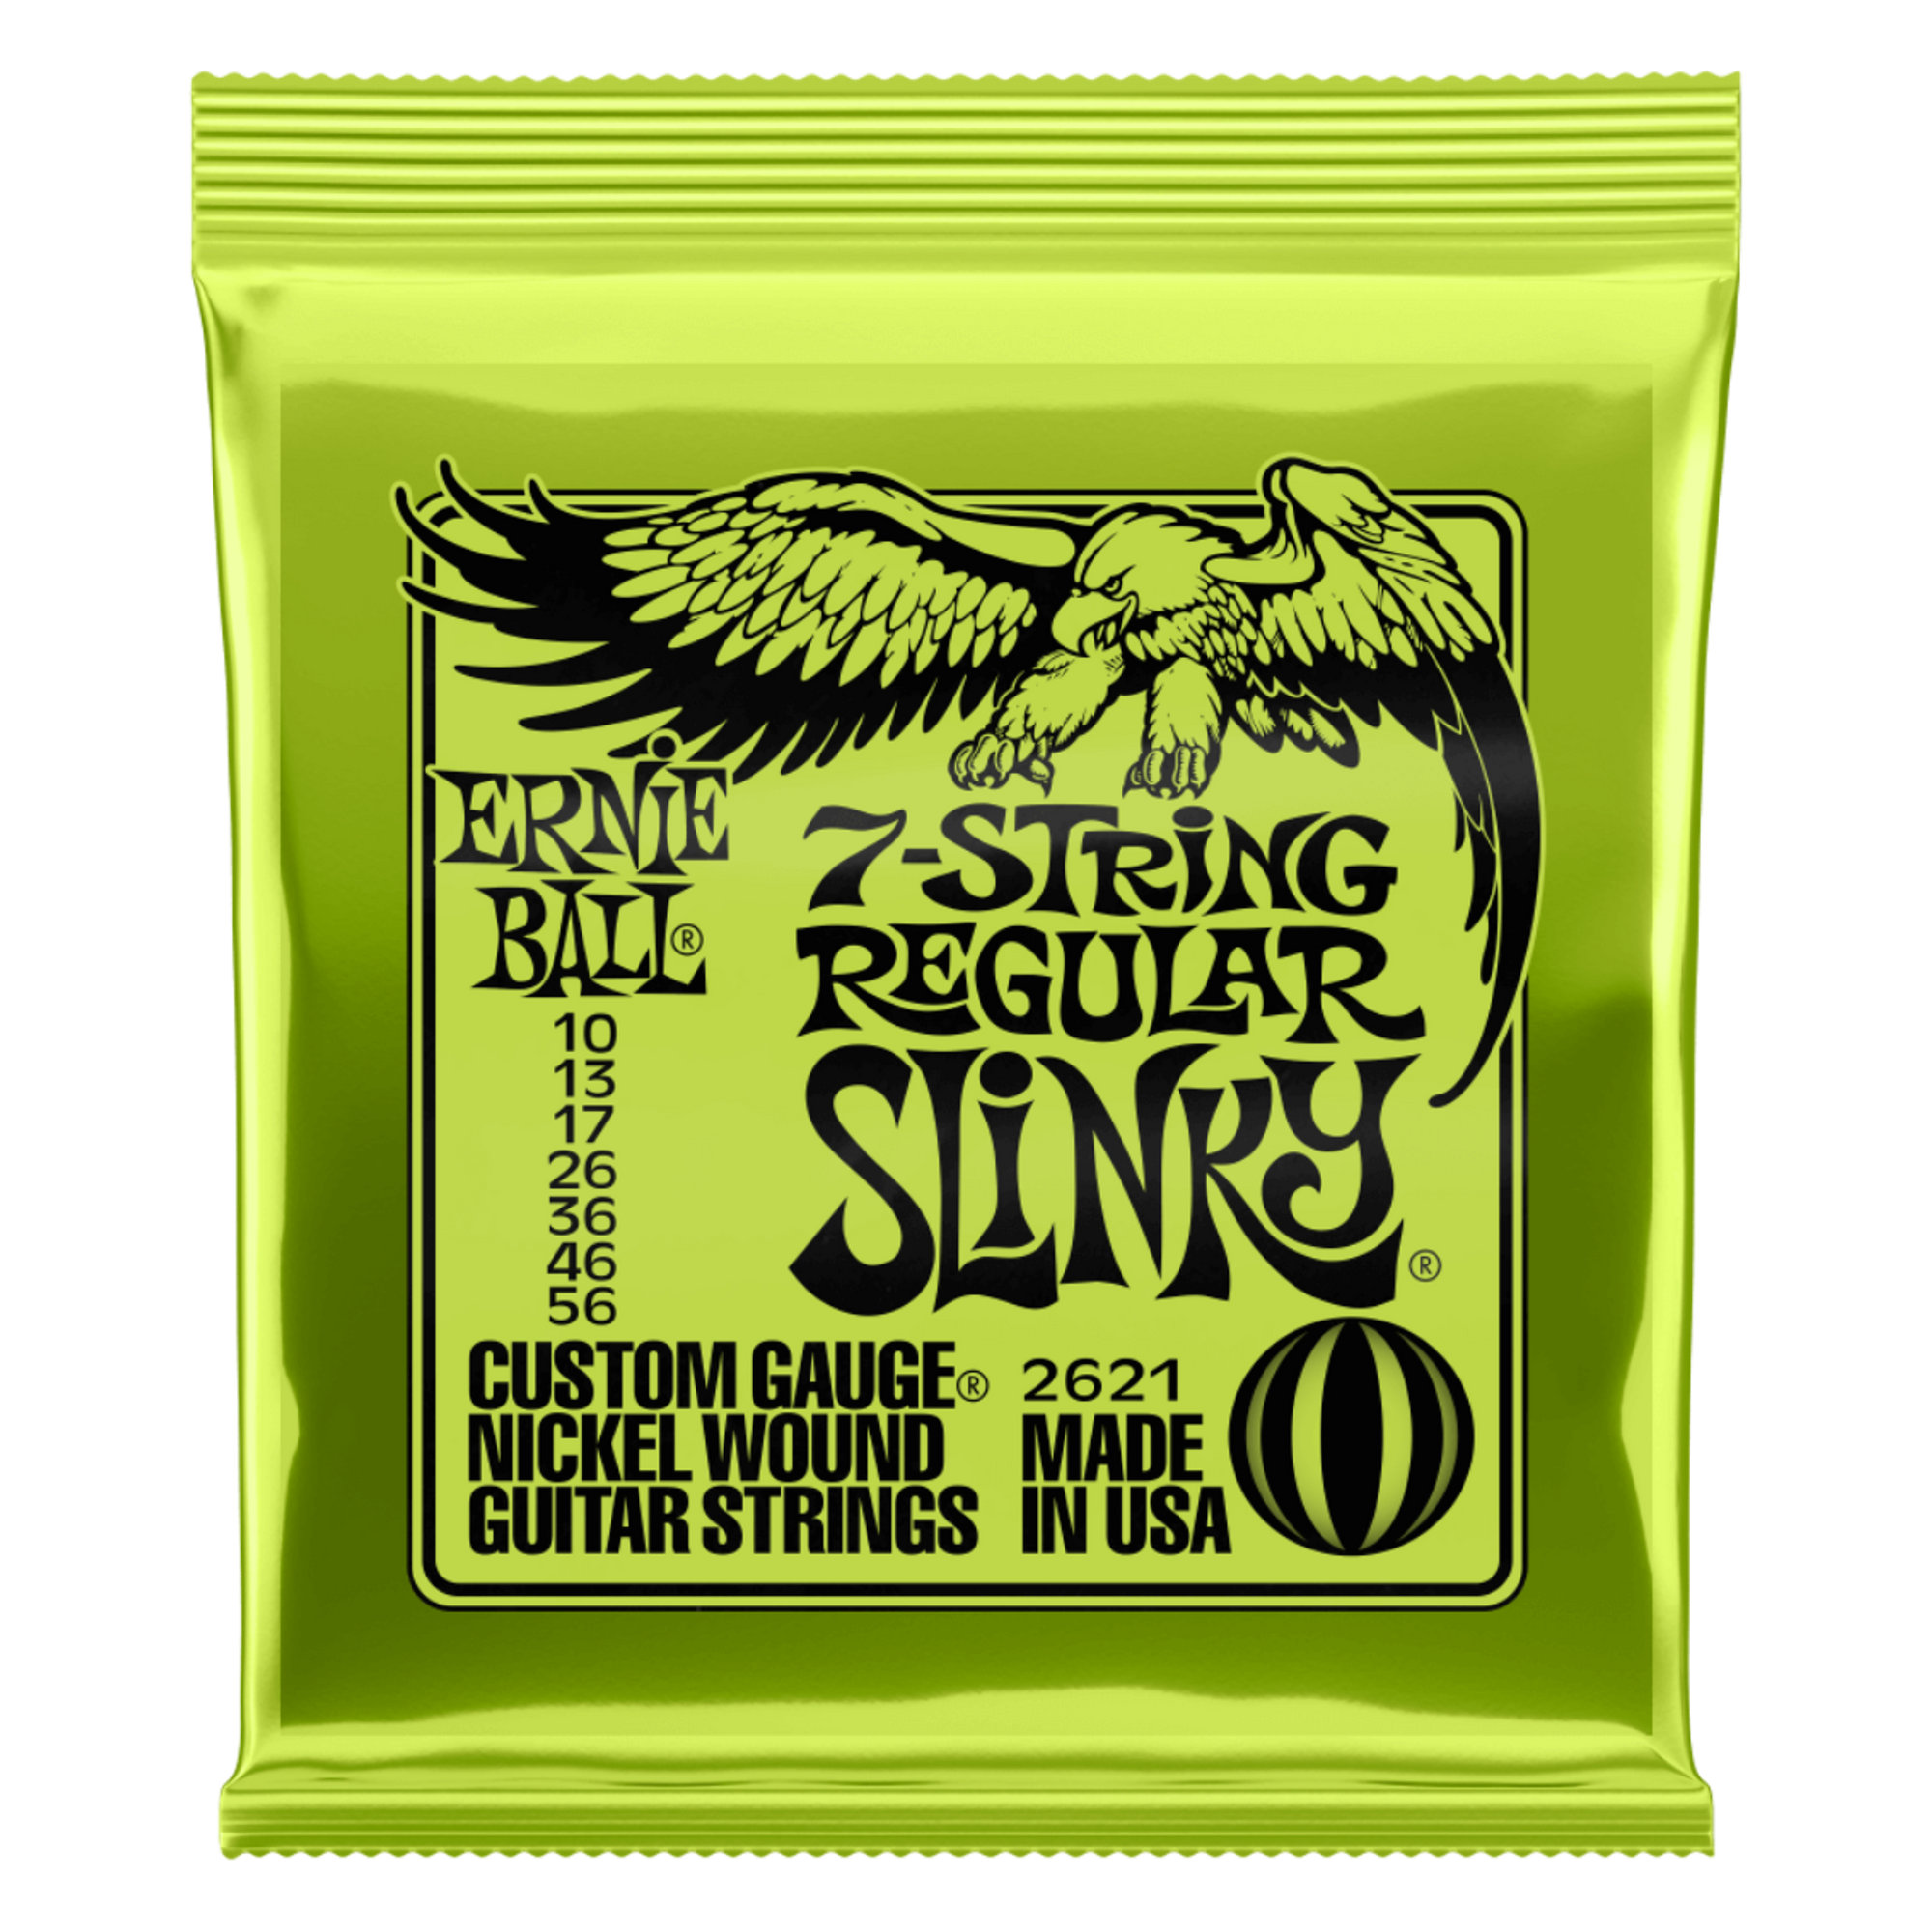 Ernie Ball Nickel Wound Electric Guitar Strings are made from nickel plated steel wire wrapped around tin plated hex shaped steel core wire. The plain strings are made of specially tempered tin plated high carbon steel producing a well balanced tone for your guitar. 